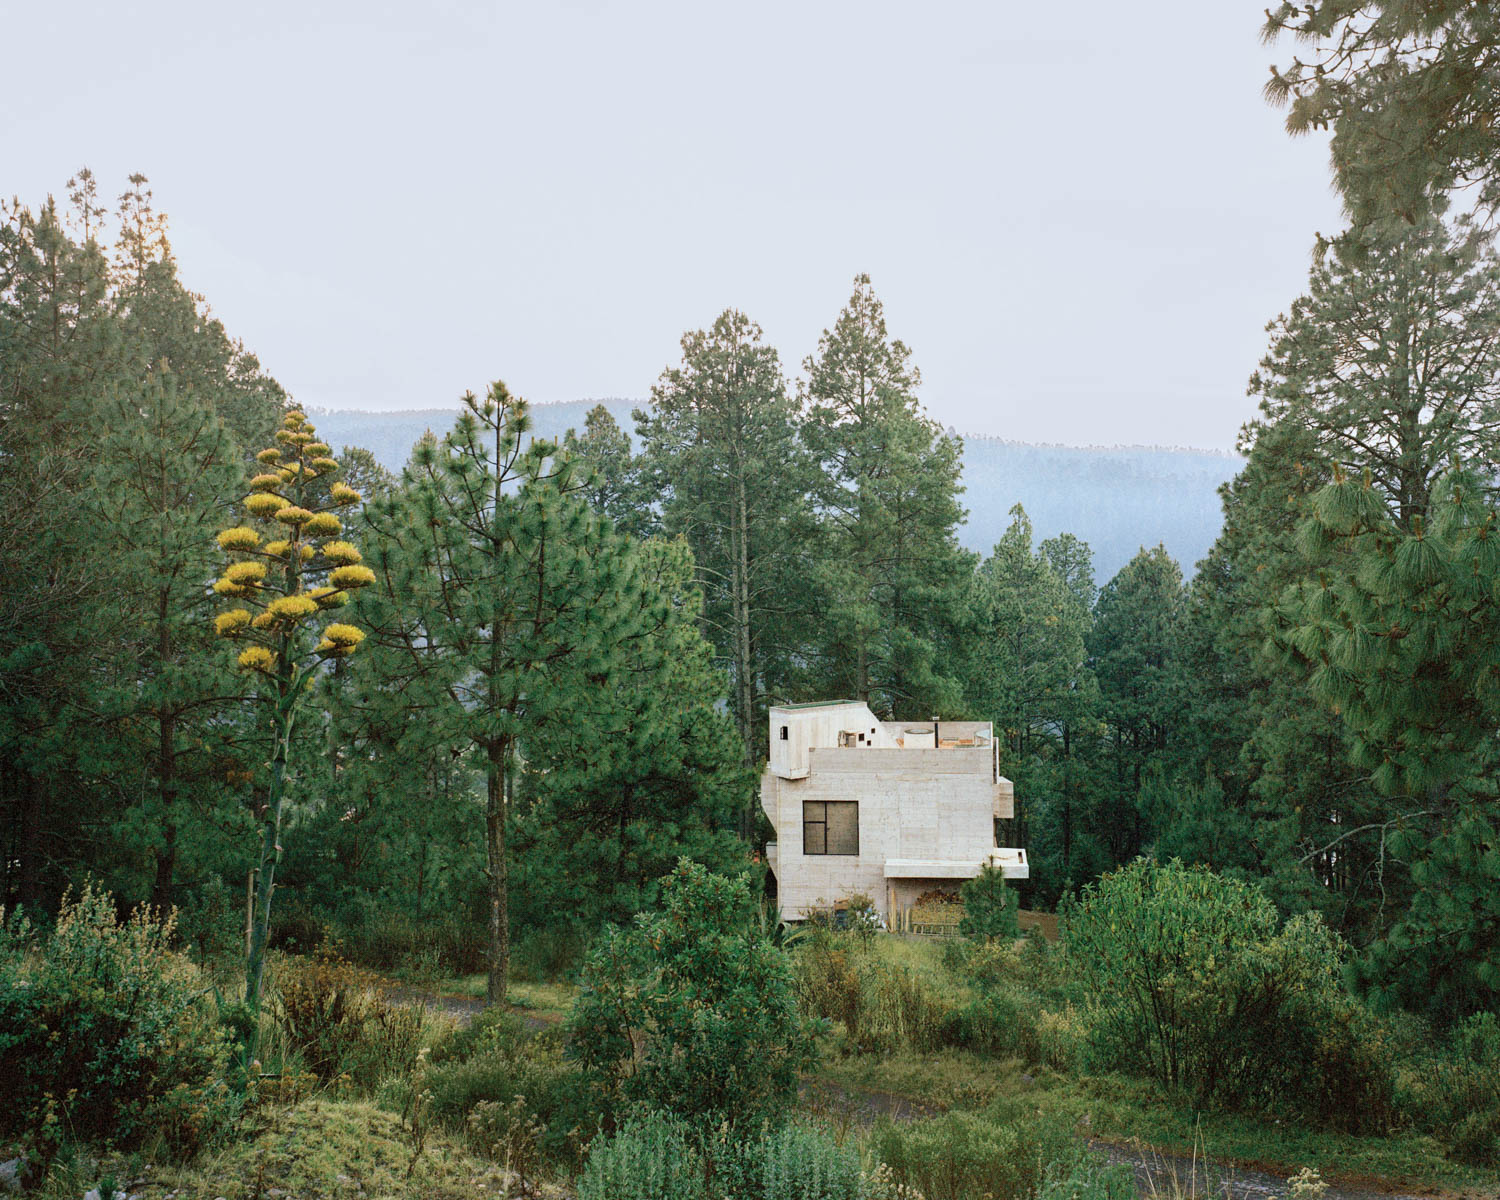 trees surround a Brutalist bunker home in Mexico